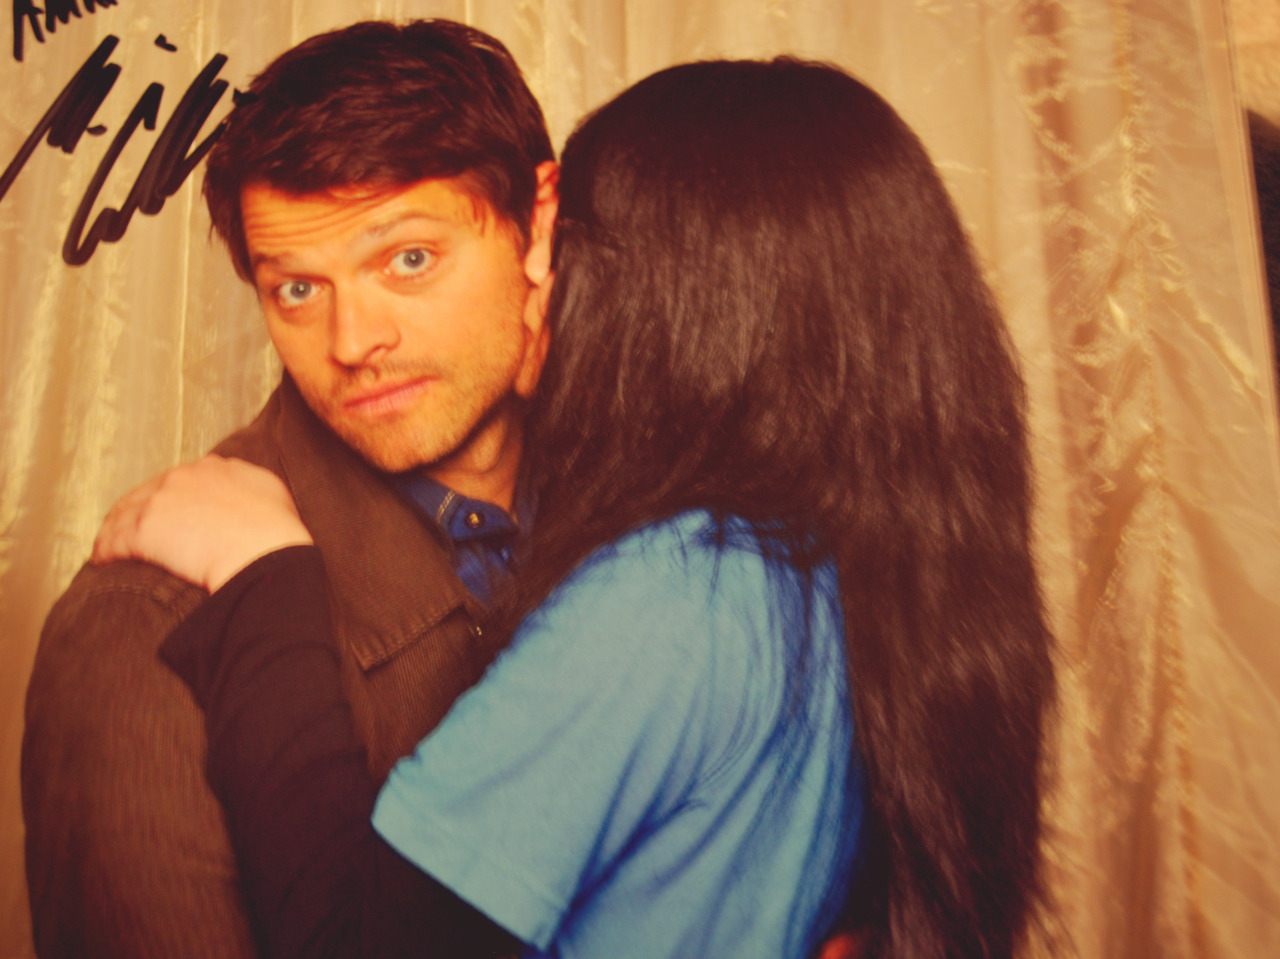 nerd-in-the-tardis:  SO I KISSED MISHA’S CHEEK IT WAS ALL SOFT BUT SCRATCHY AT